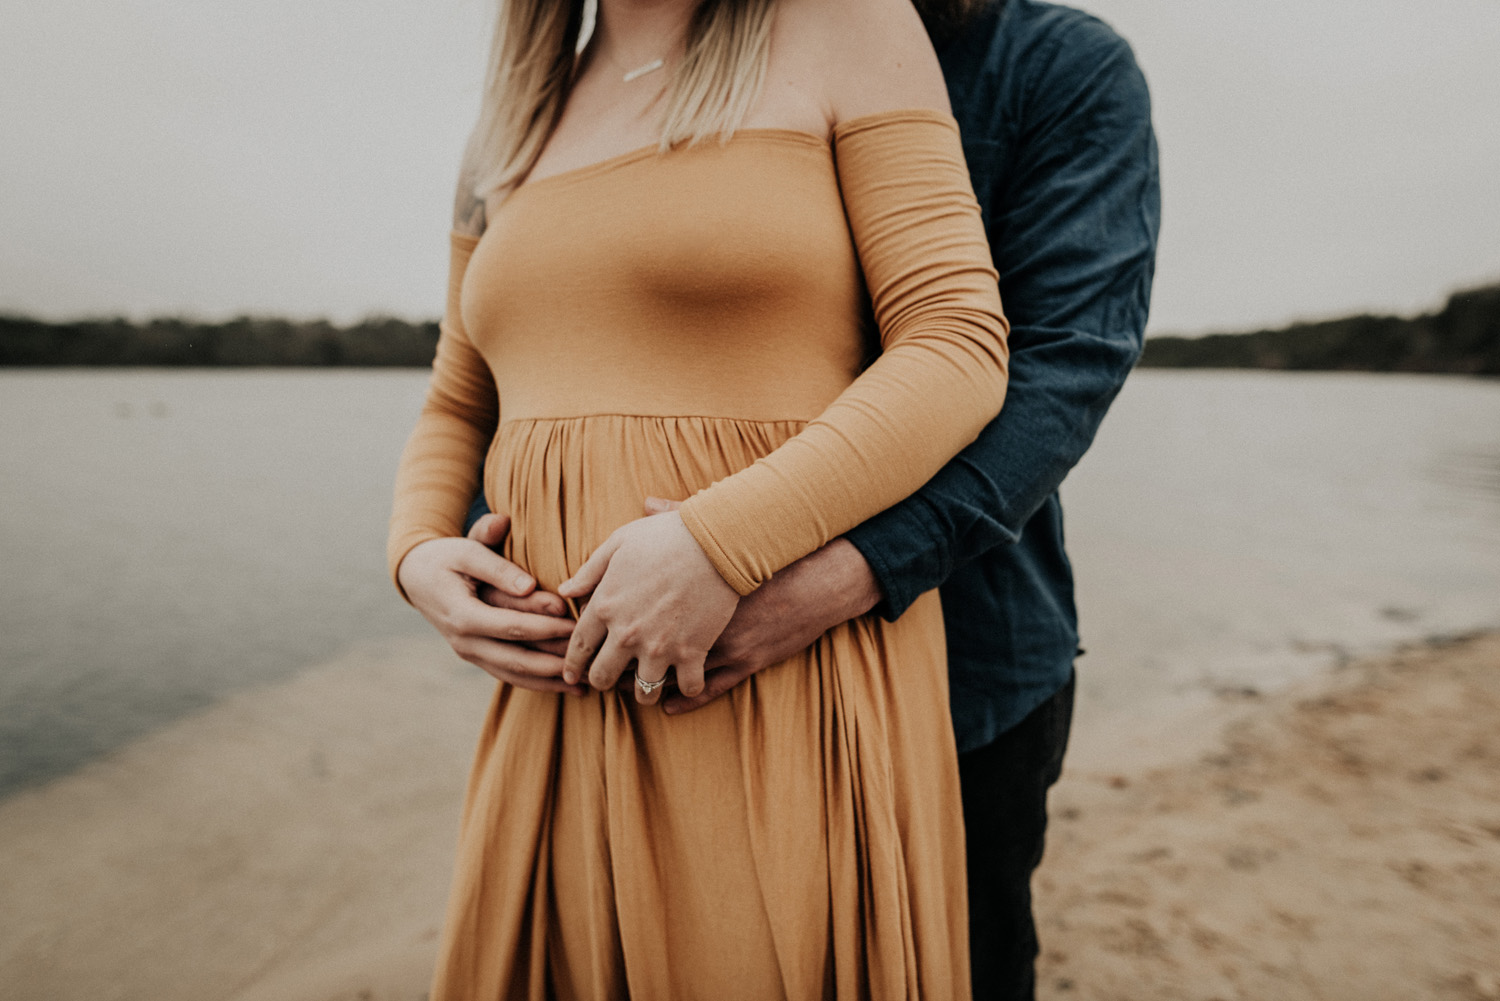 KyleWillisPhoto-Kyle-Willis-Photography-Parvin-State-Park-Pittsgrove-Township-New-Jersey-Maternity-Session-Lake-Pregnant-Engagement-Hipster-Photographer-Philadelphia-Wedding